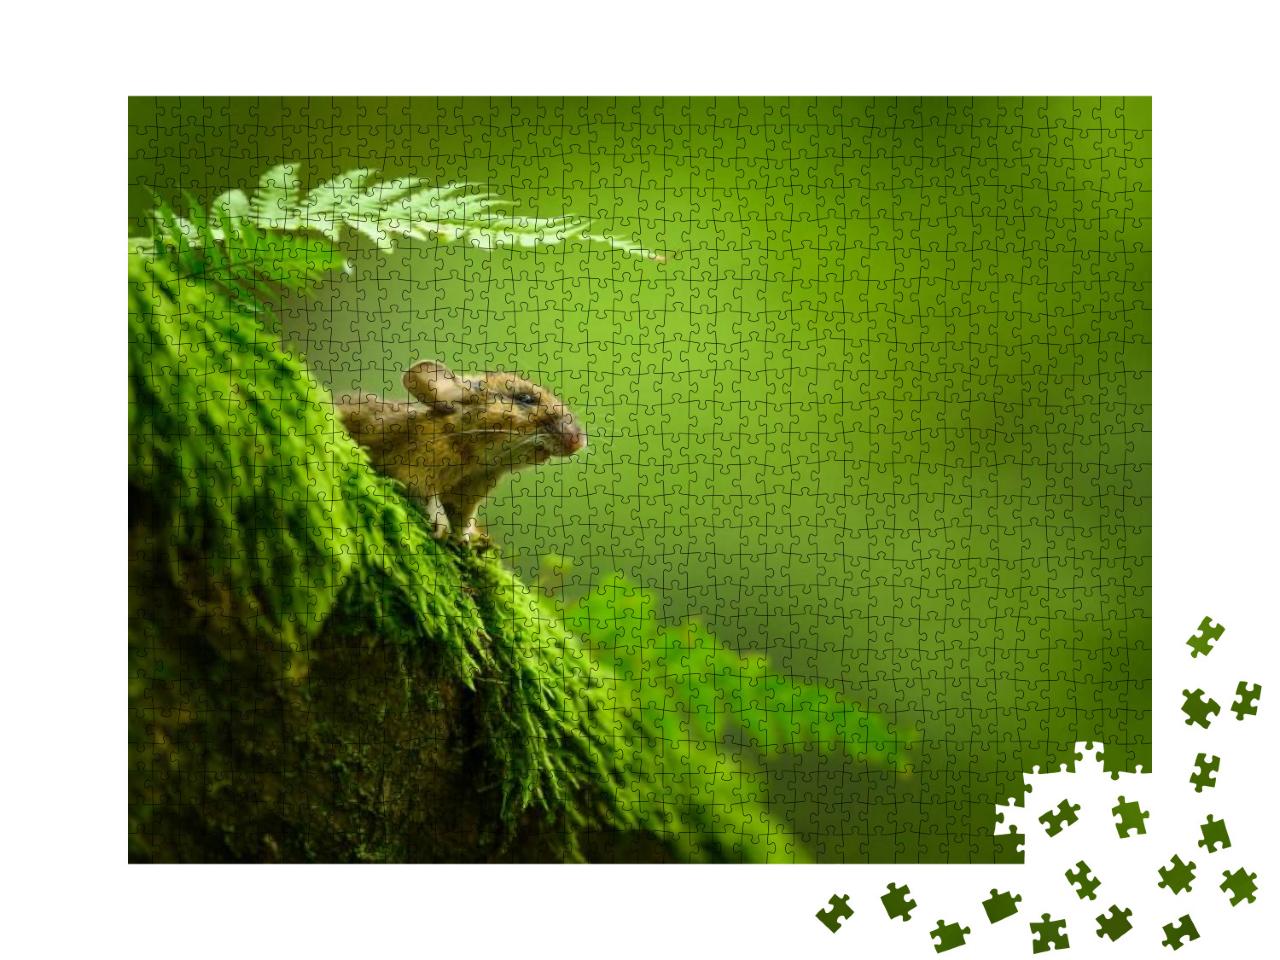 House Mouse Close-Up Portrait in the Natural Woody Enviro... Jigsaw Puzzle with 1000 pieces